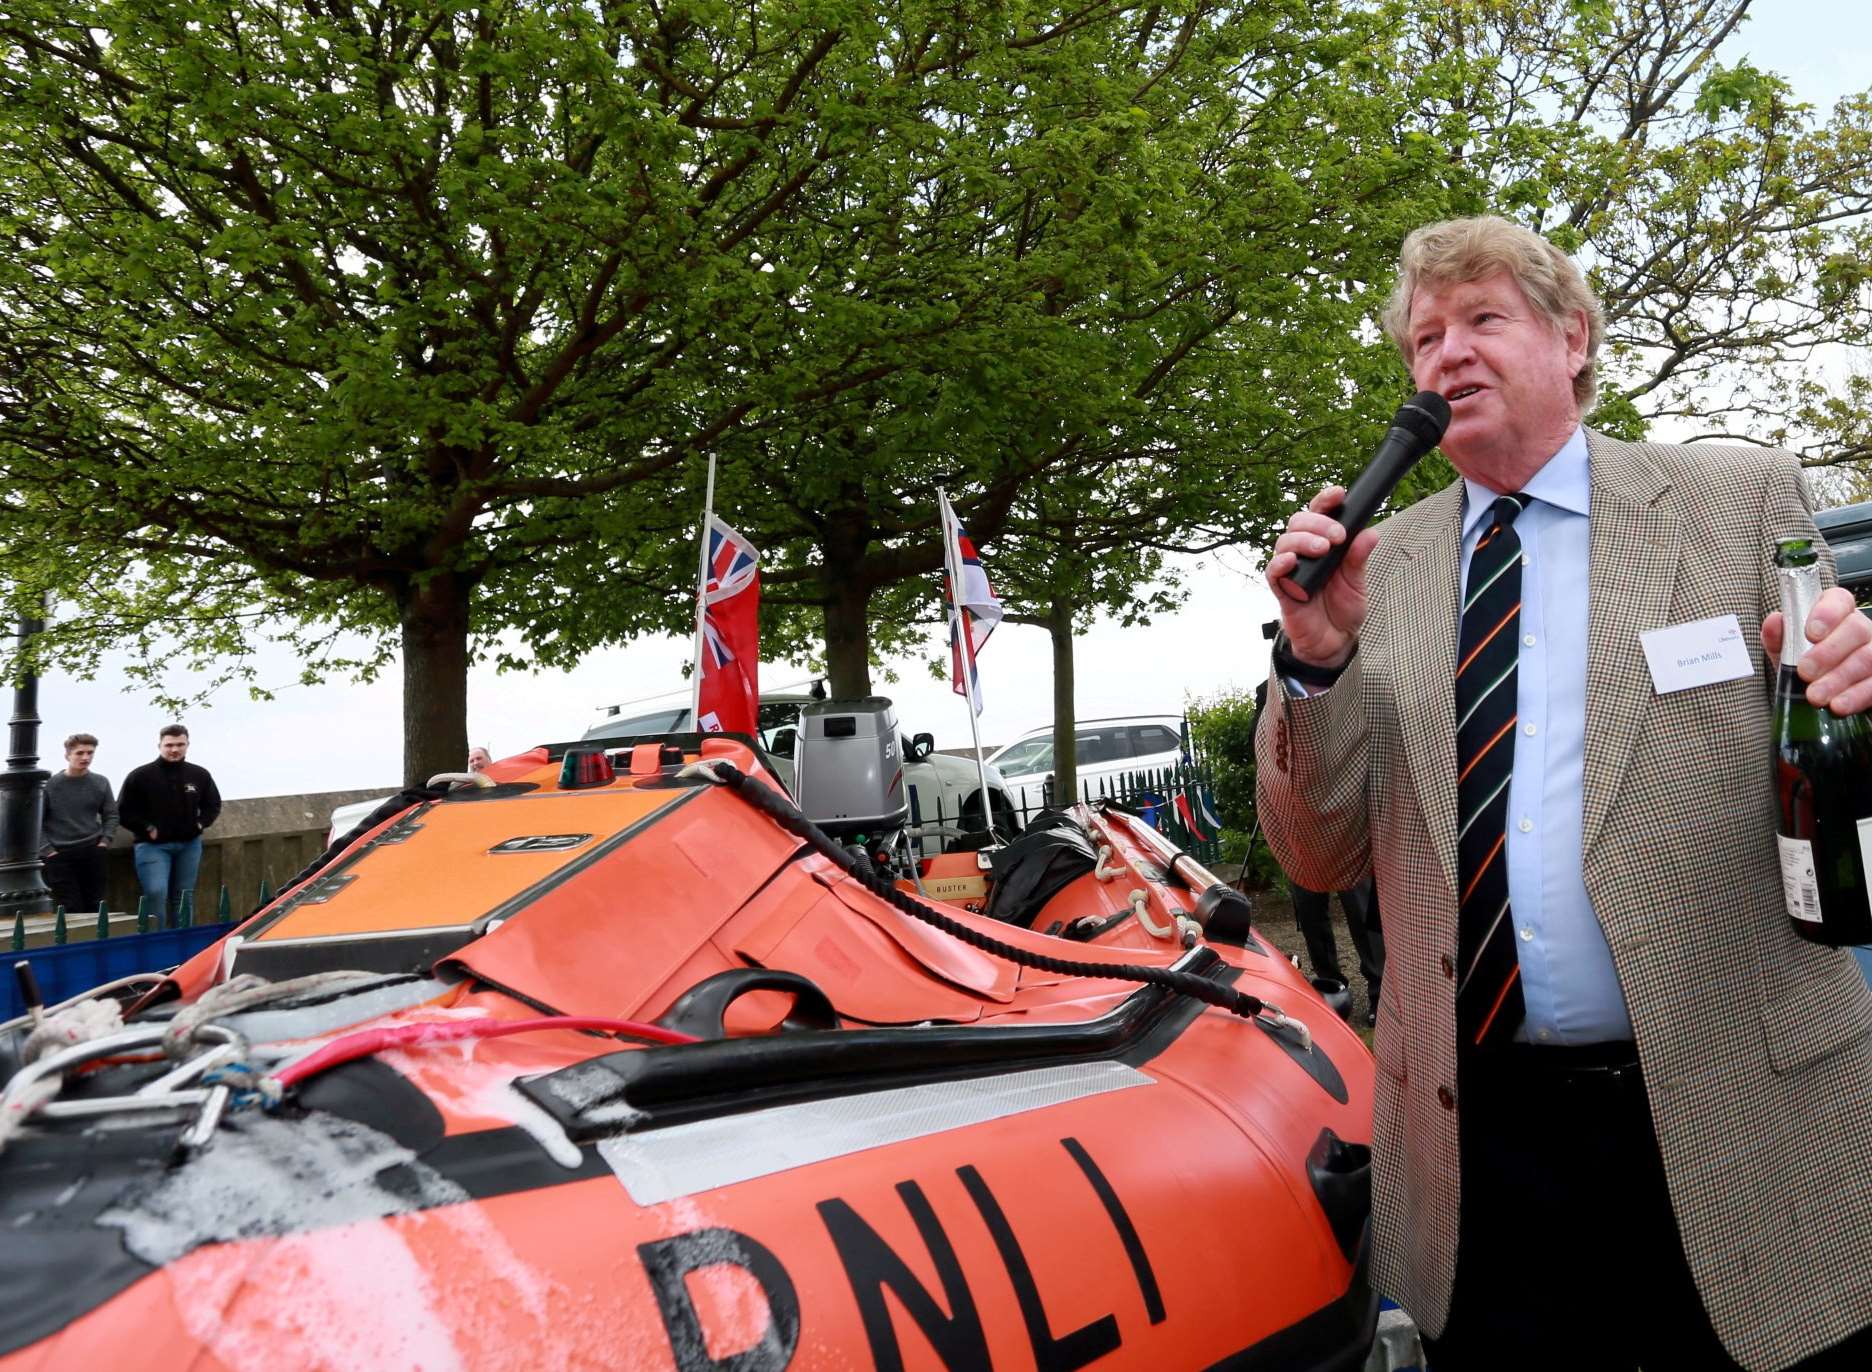 Brian Mills officially names the new lifeboat in the traditional way with champagne